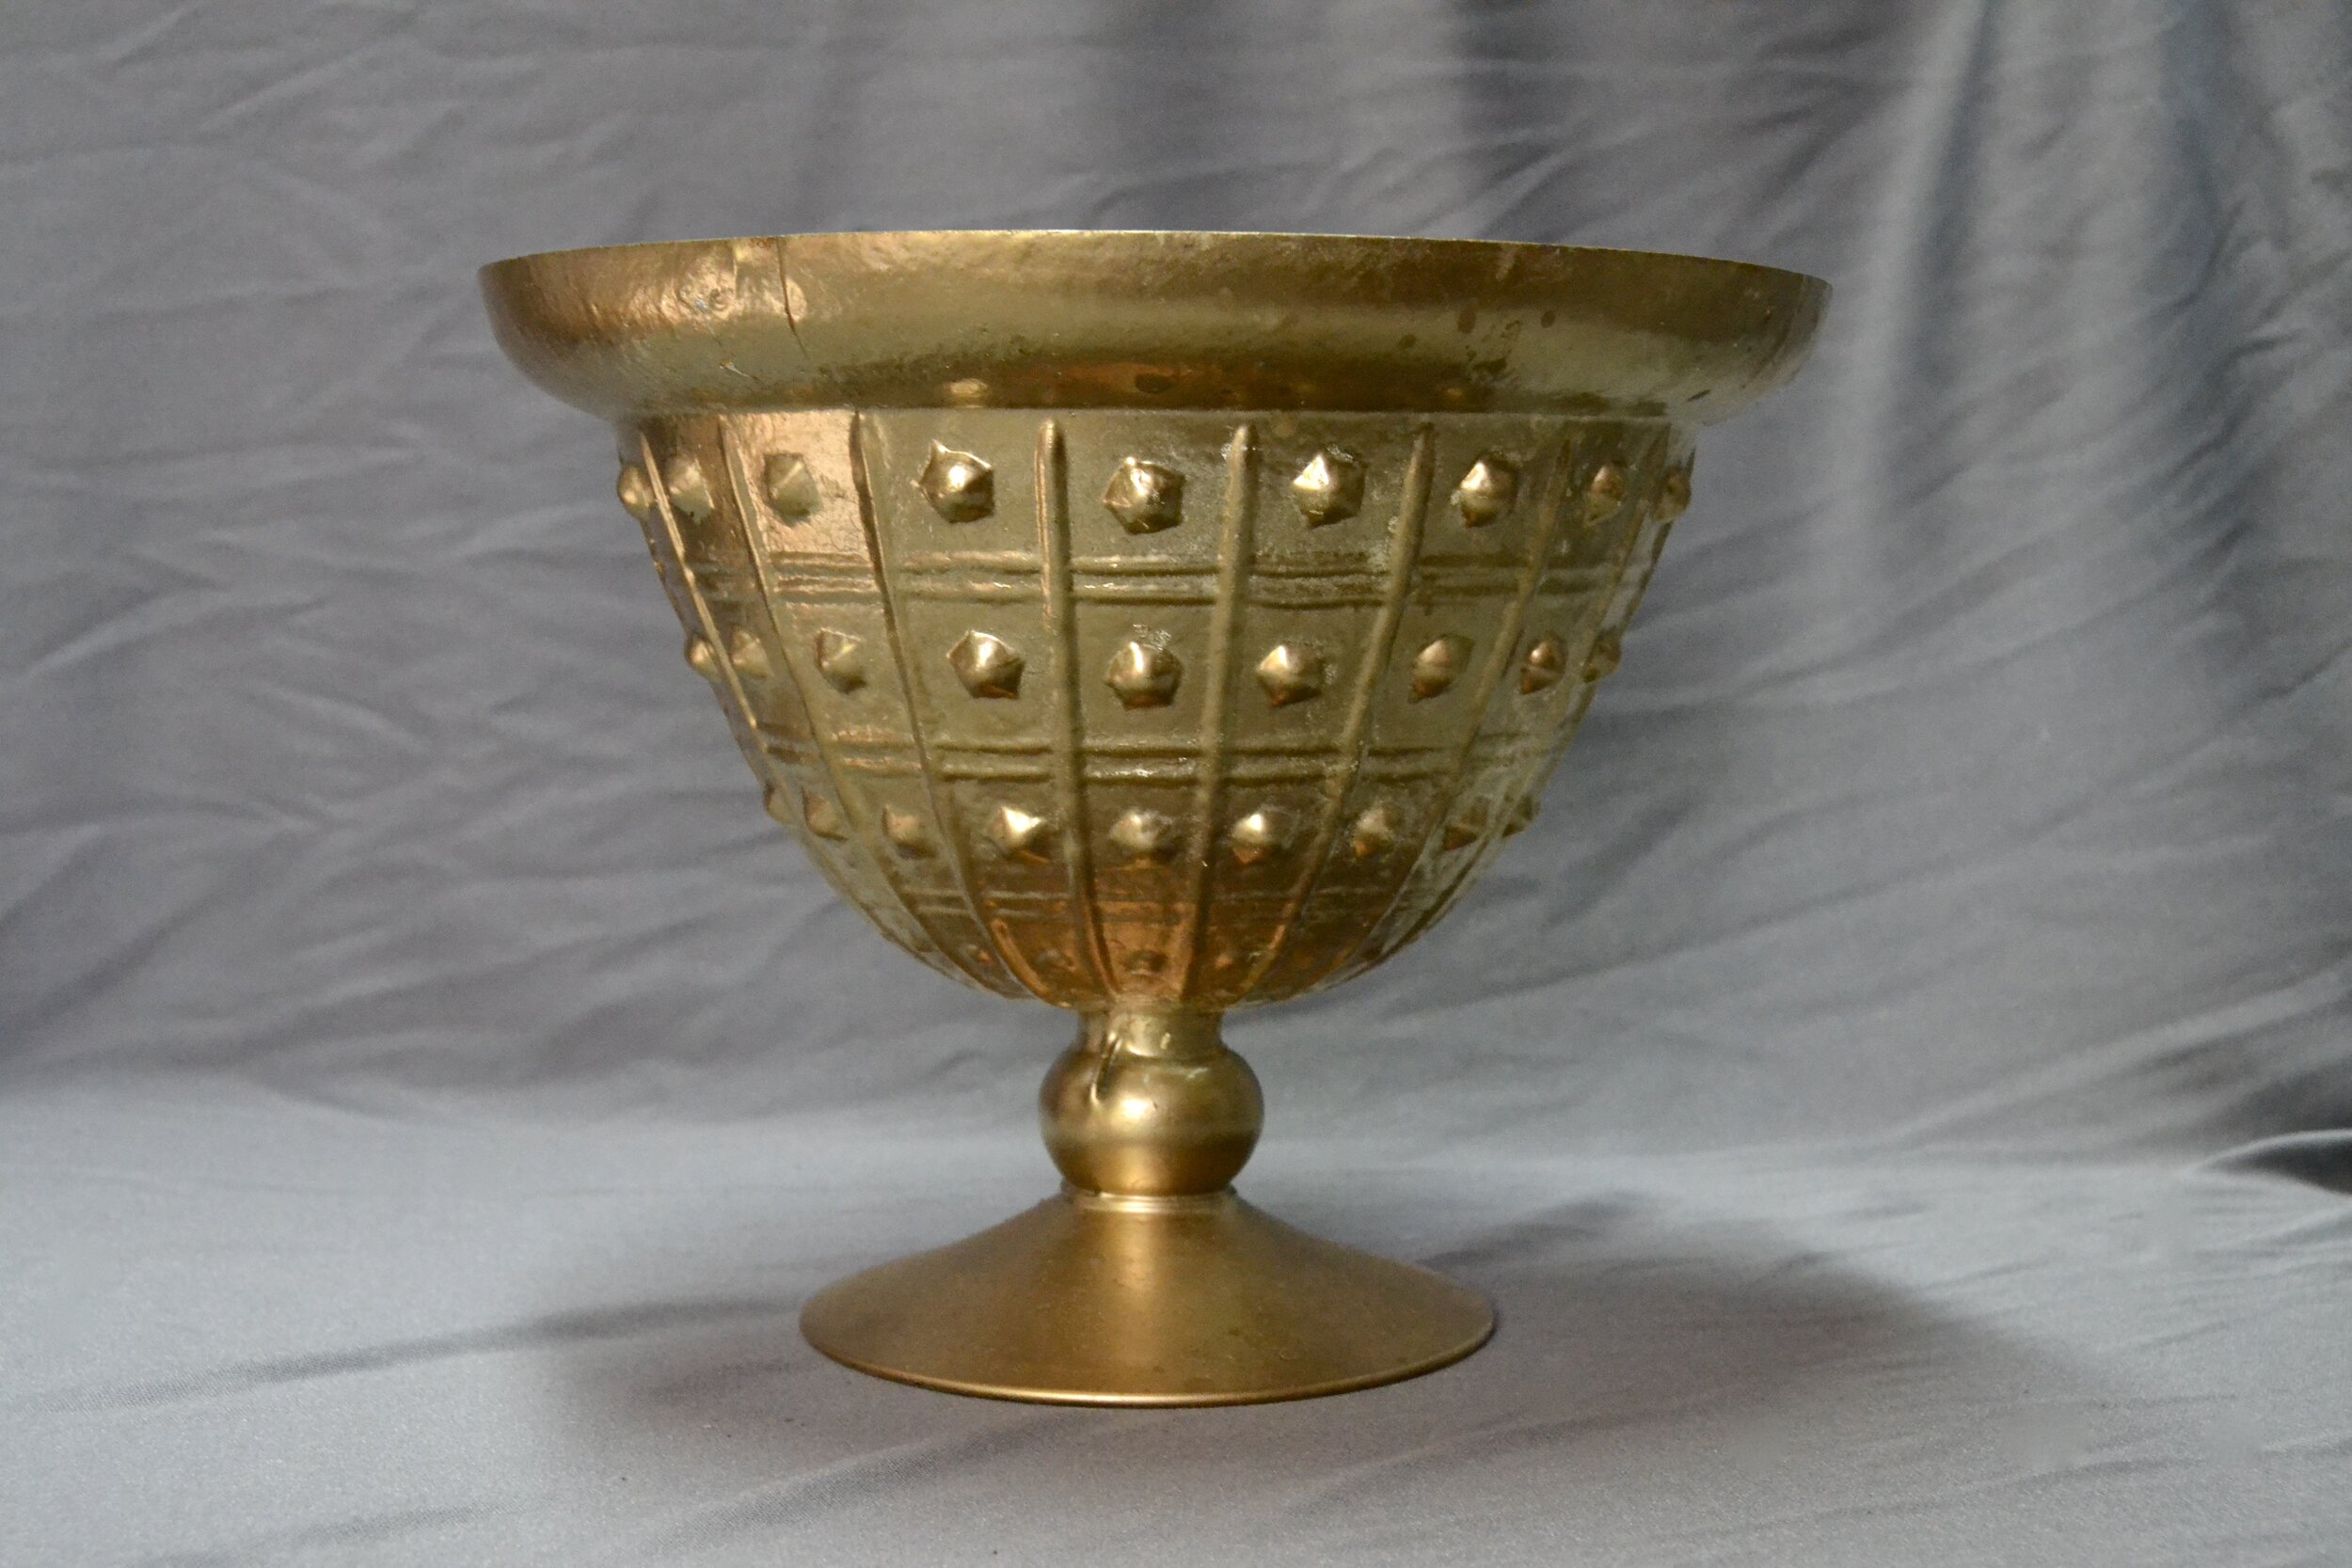 Gold Compote